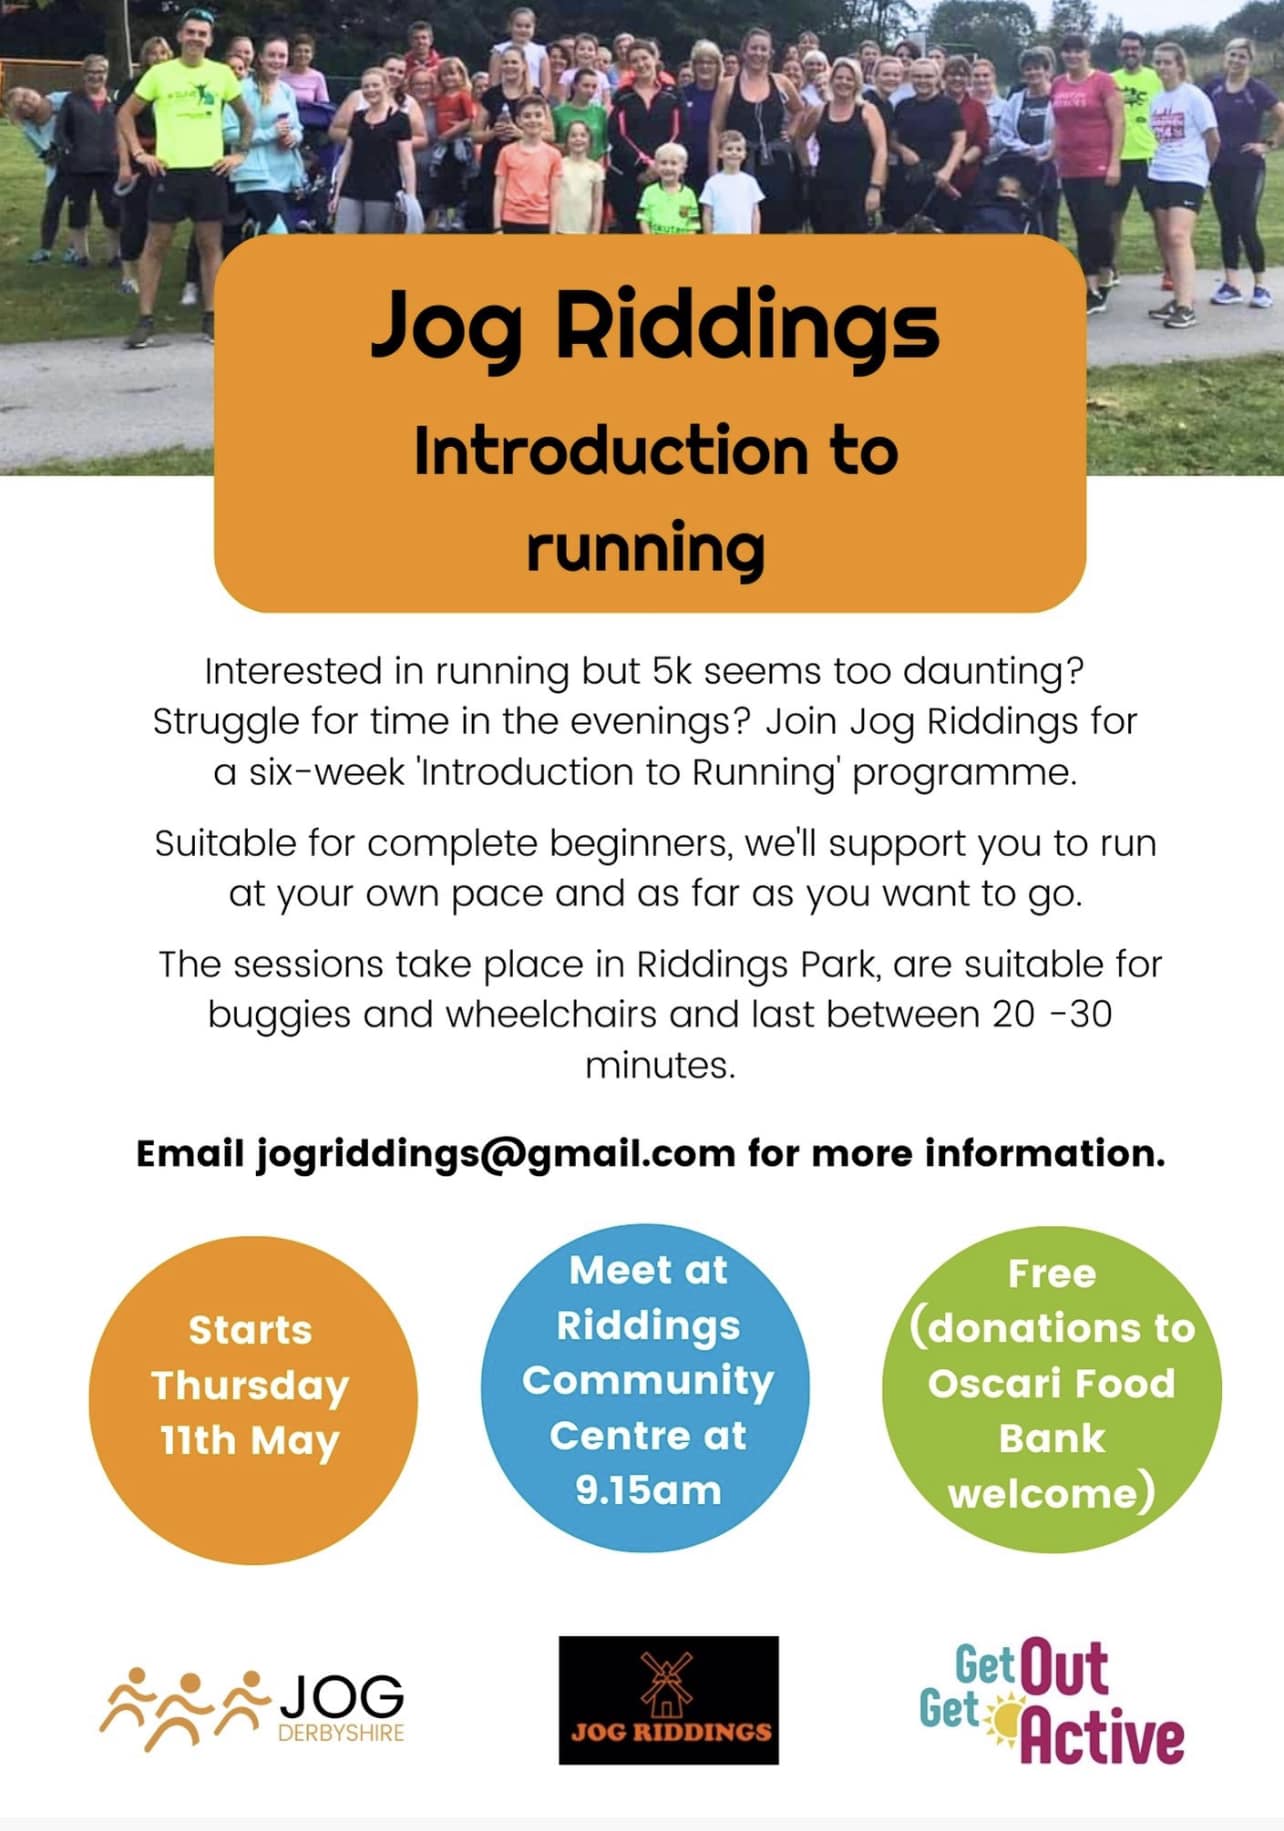 Jog Riddings will host a new Introduction to Running Class